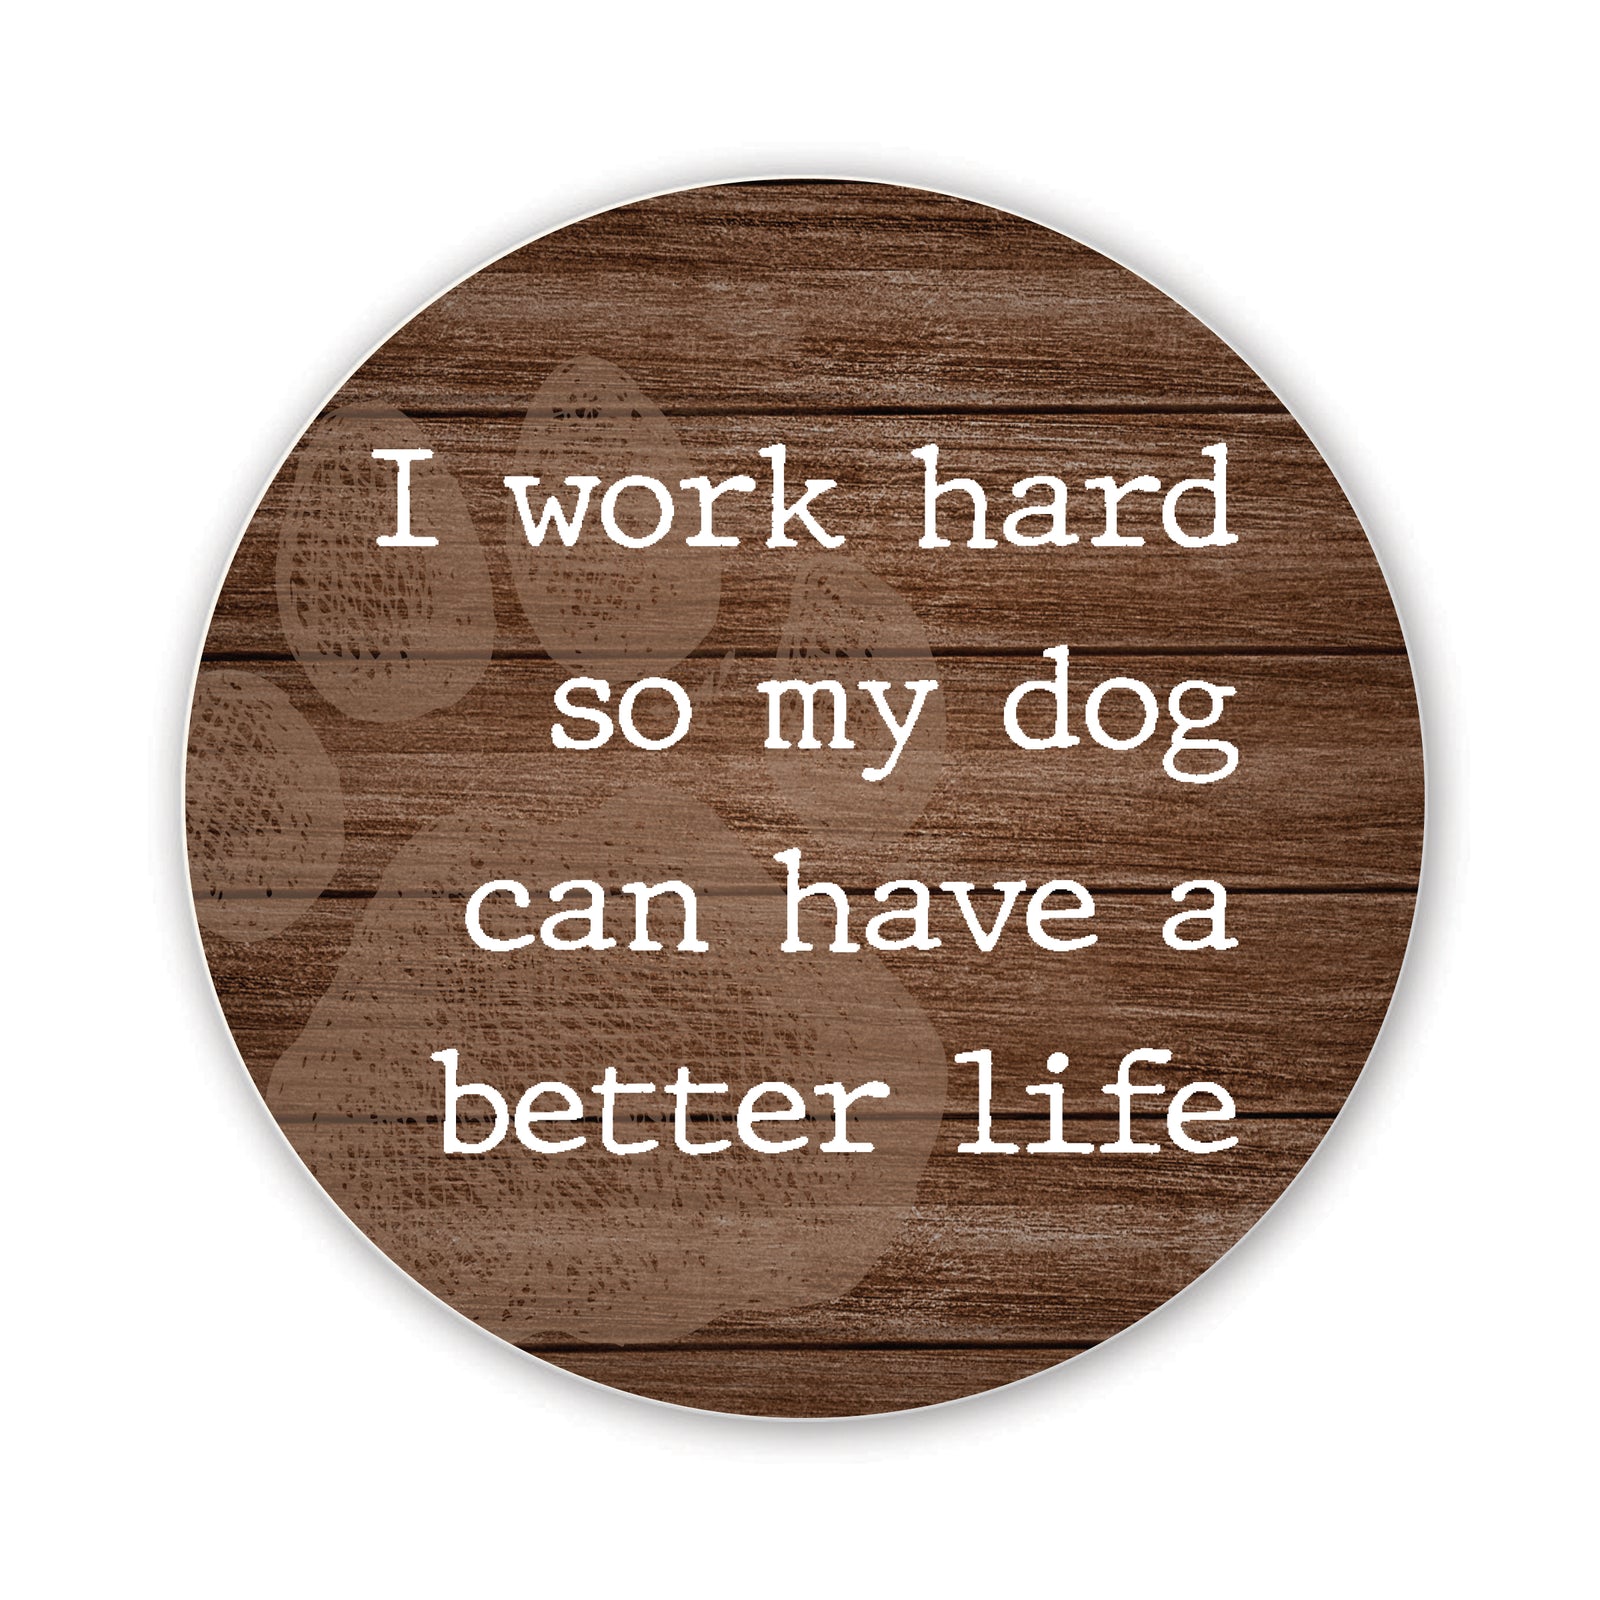 Refrigerator Magnet Perfect Gift Idea For Pet Owners - I Work Hard